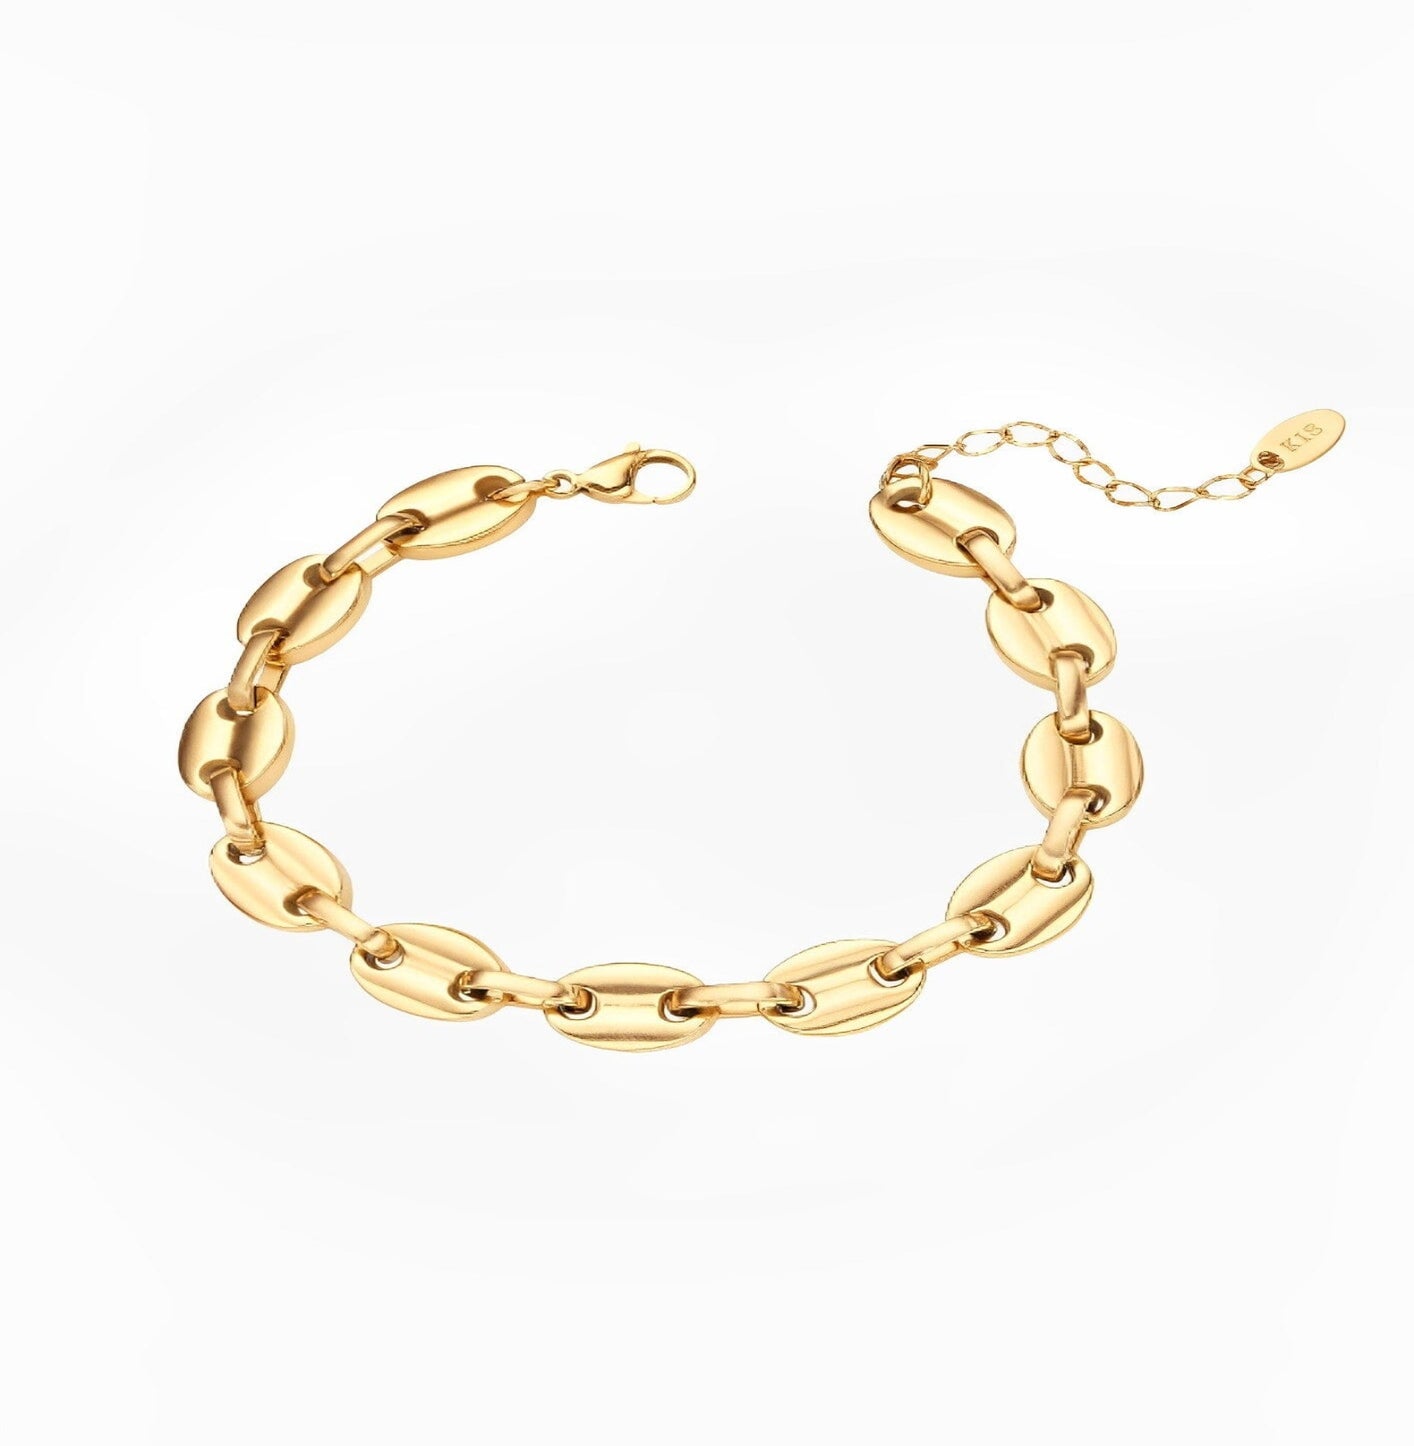 COFEE BRACELET braclet Yubama Jewelry Online Store - The Elegant Designs of Gold and Silver ! 